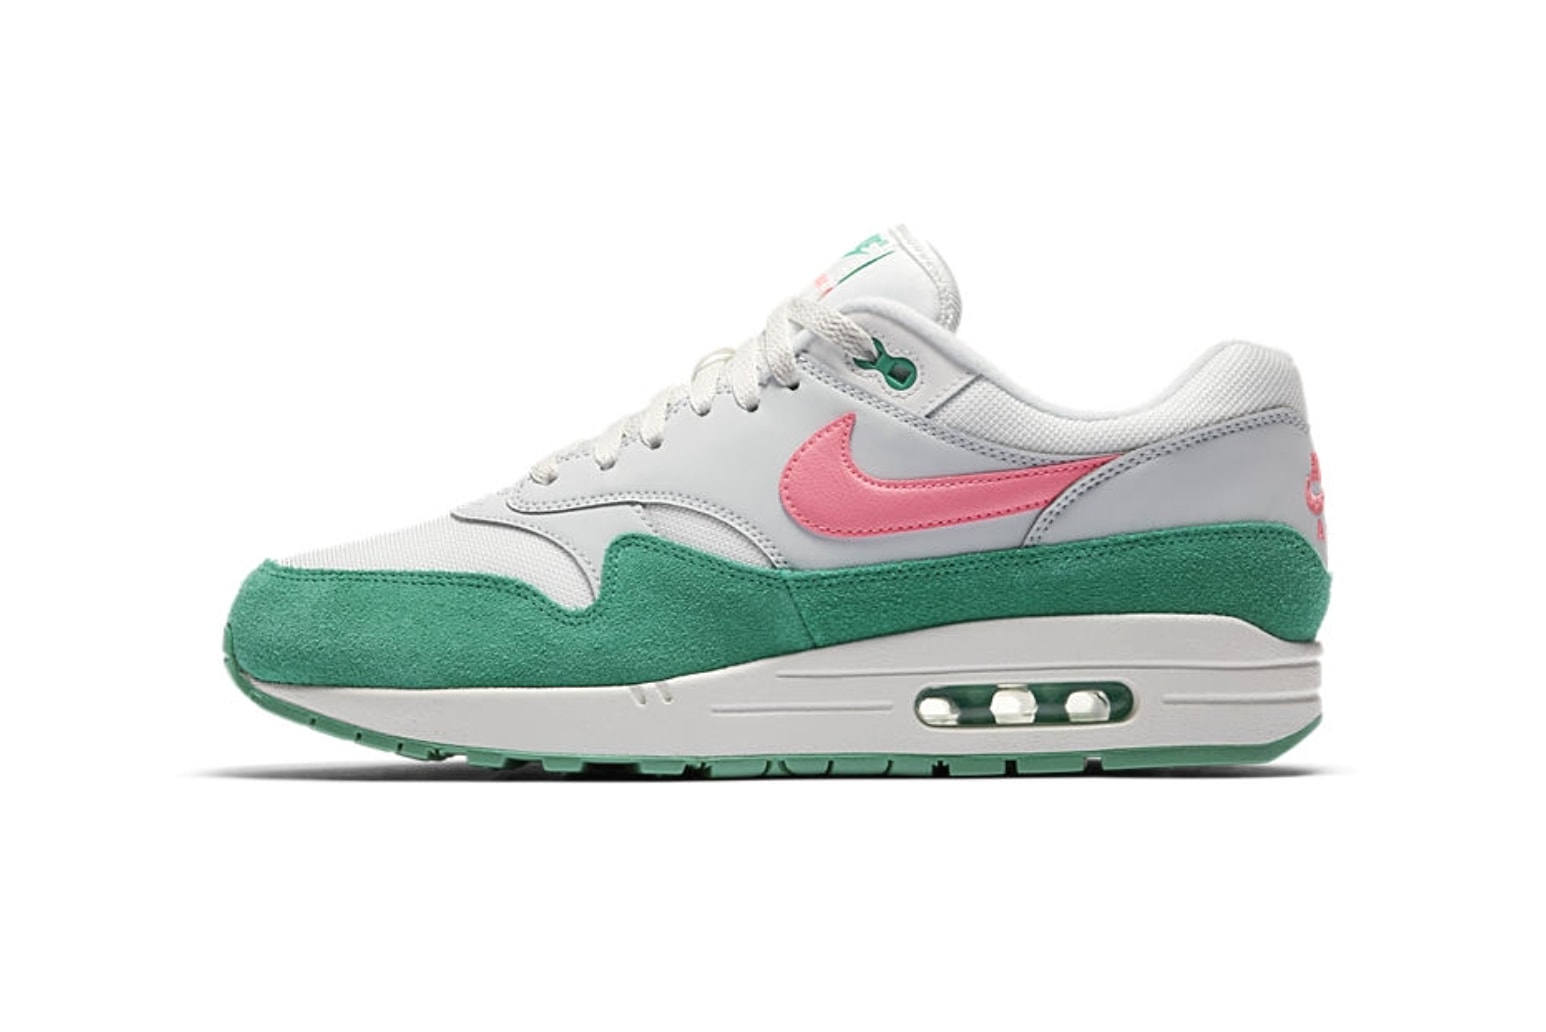 Nike Air Max 1 Grey Pink Green 2018 february march release date info sneakers shoes footwear